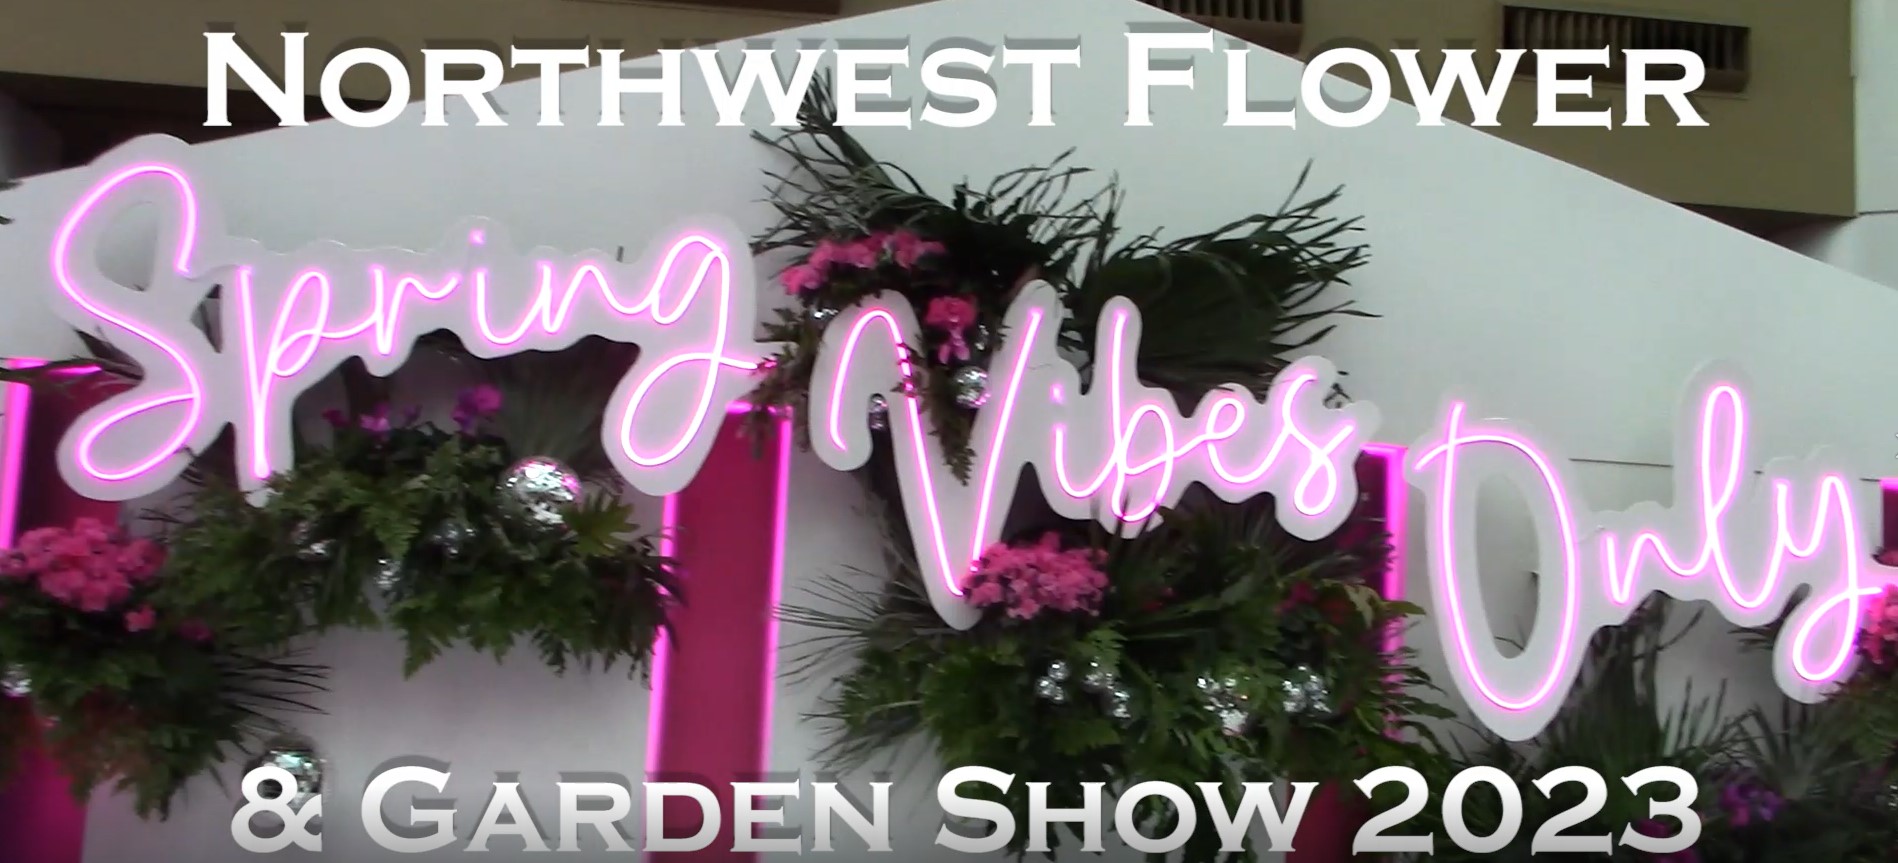 You are currently viewing YouTube: NWFGS 2023 Tour